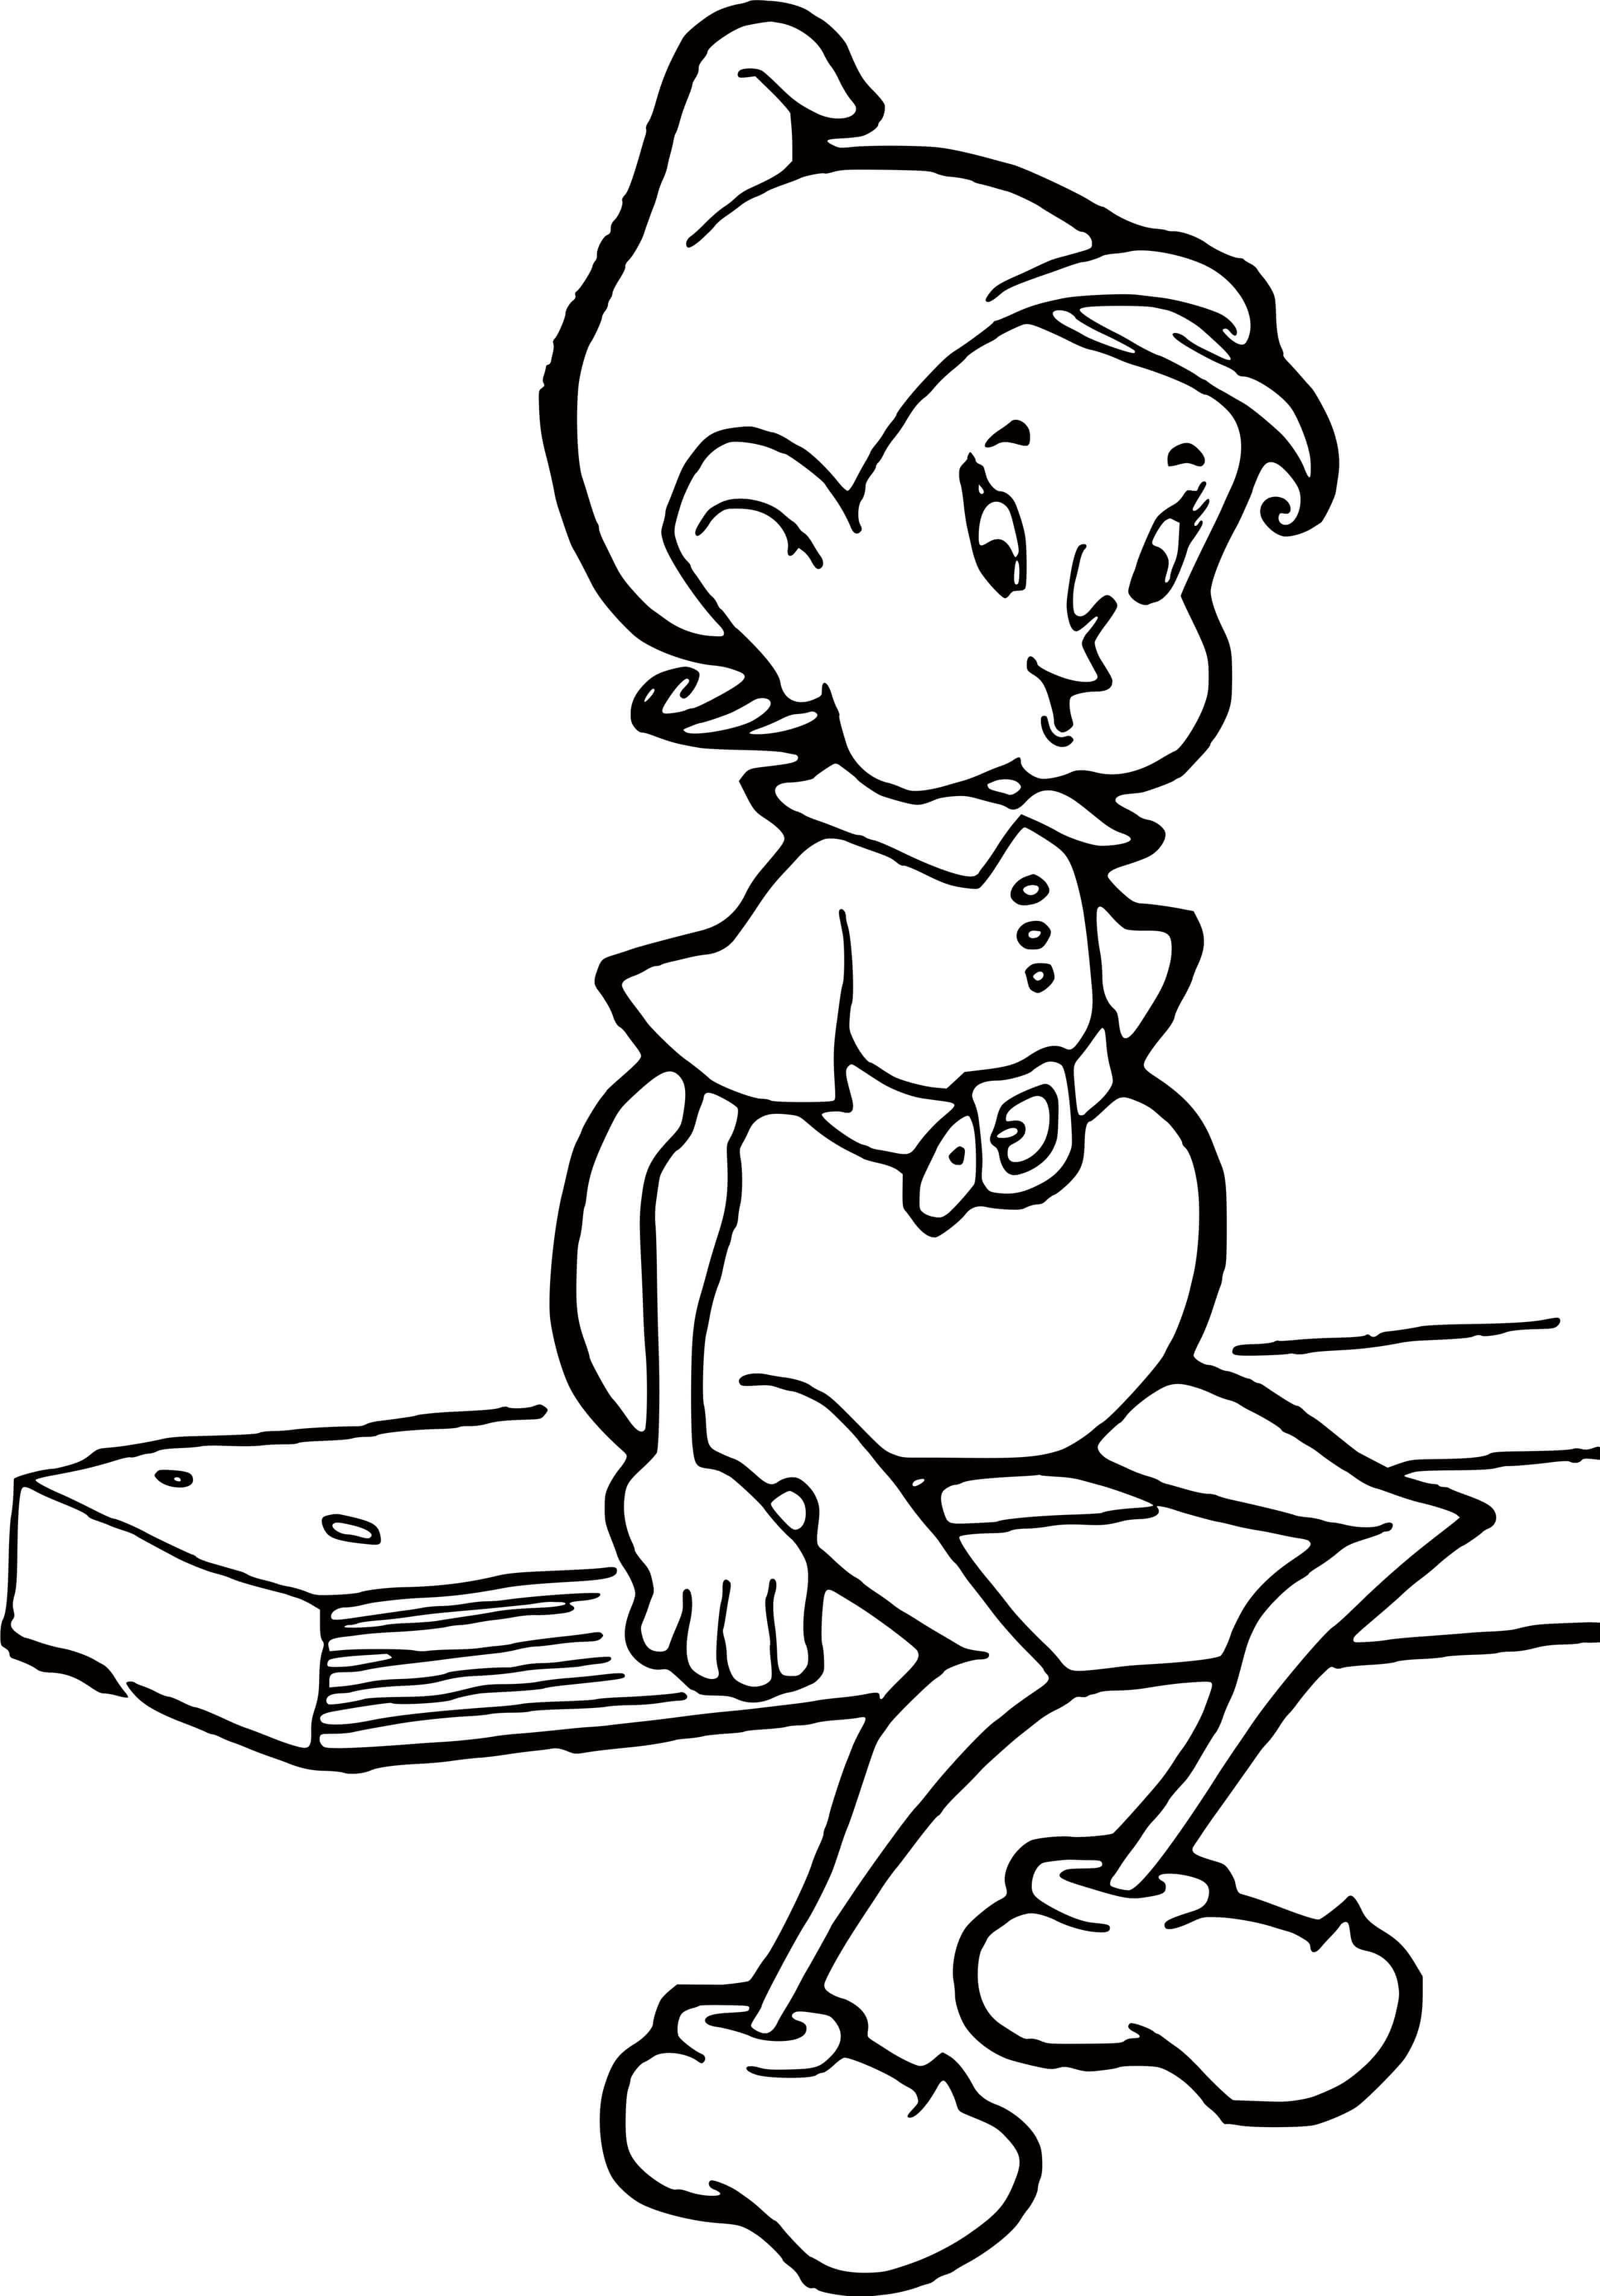 Cute Elf On The Shelf Coloring Page